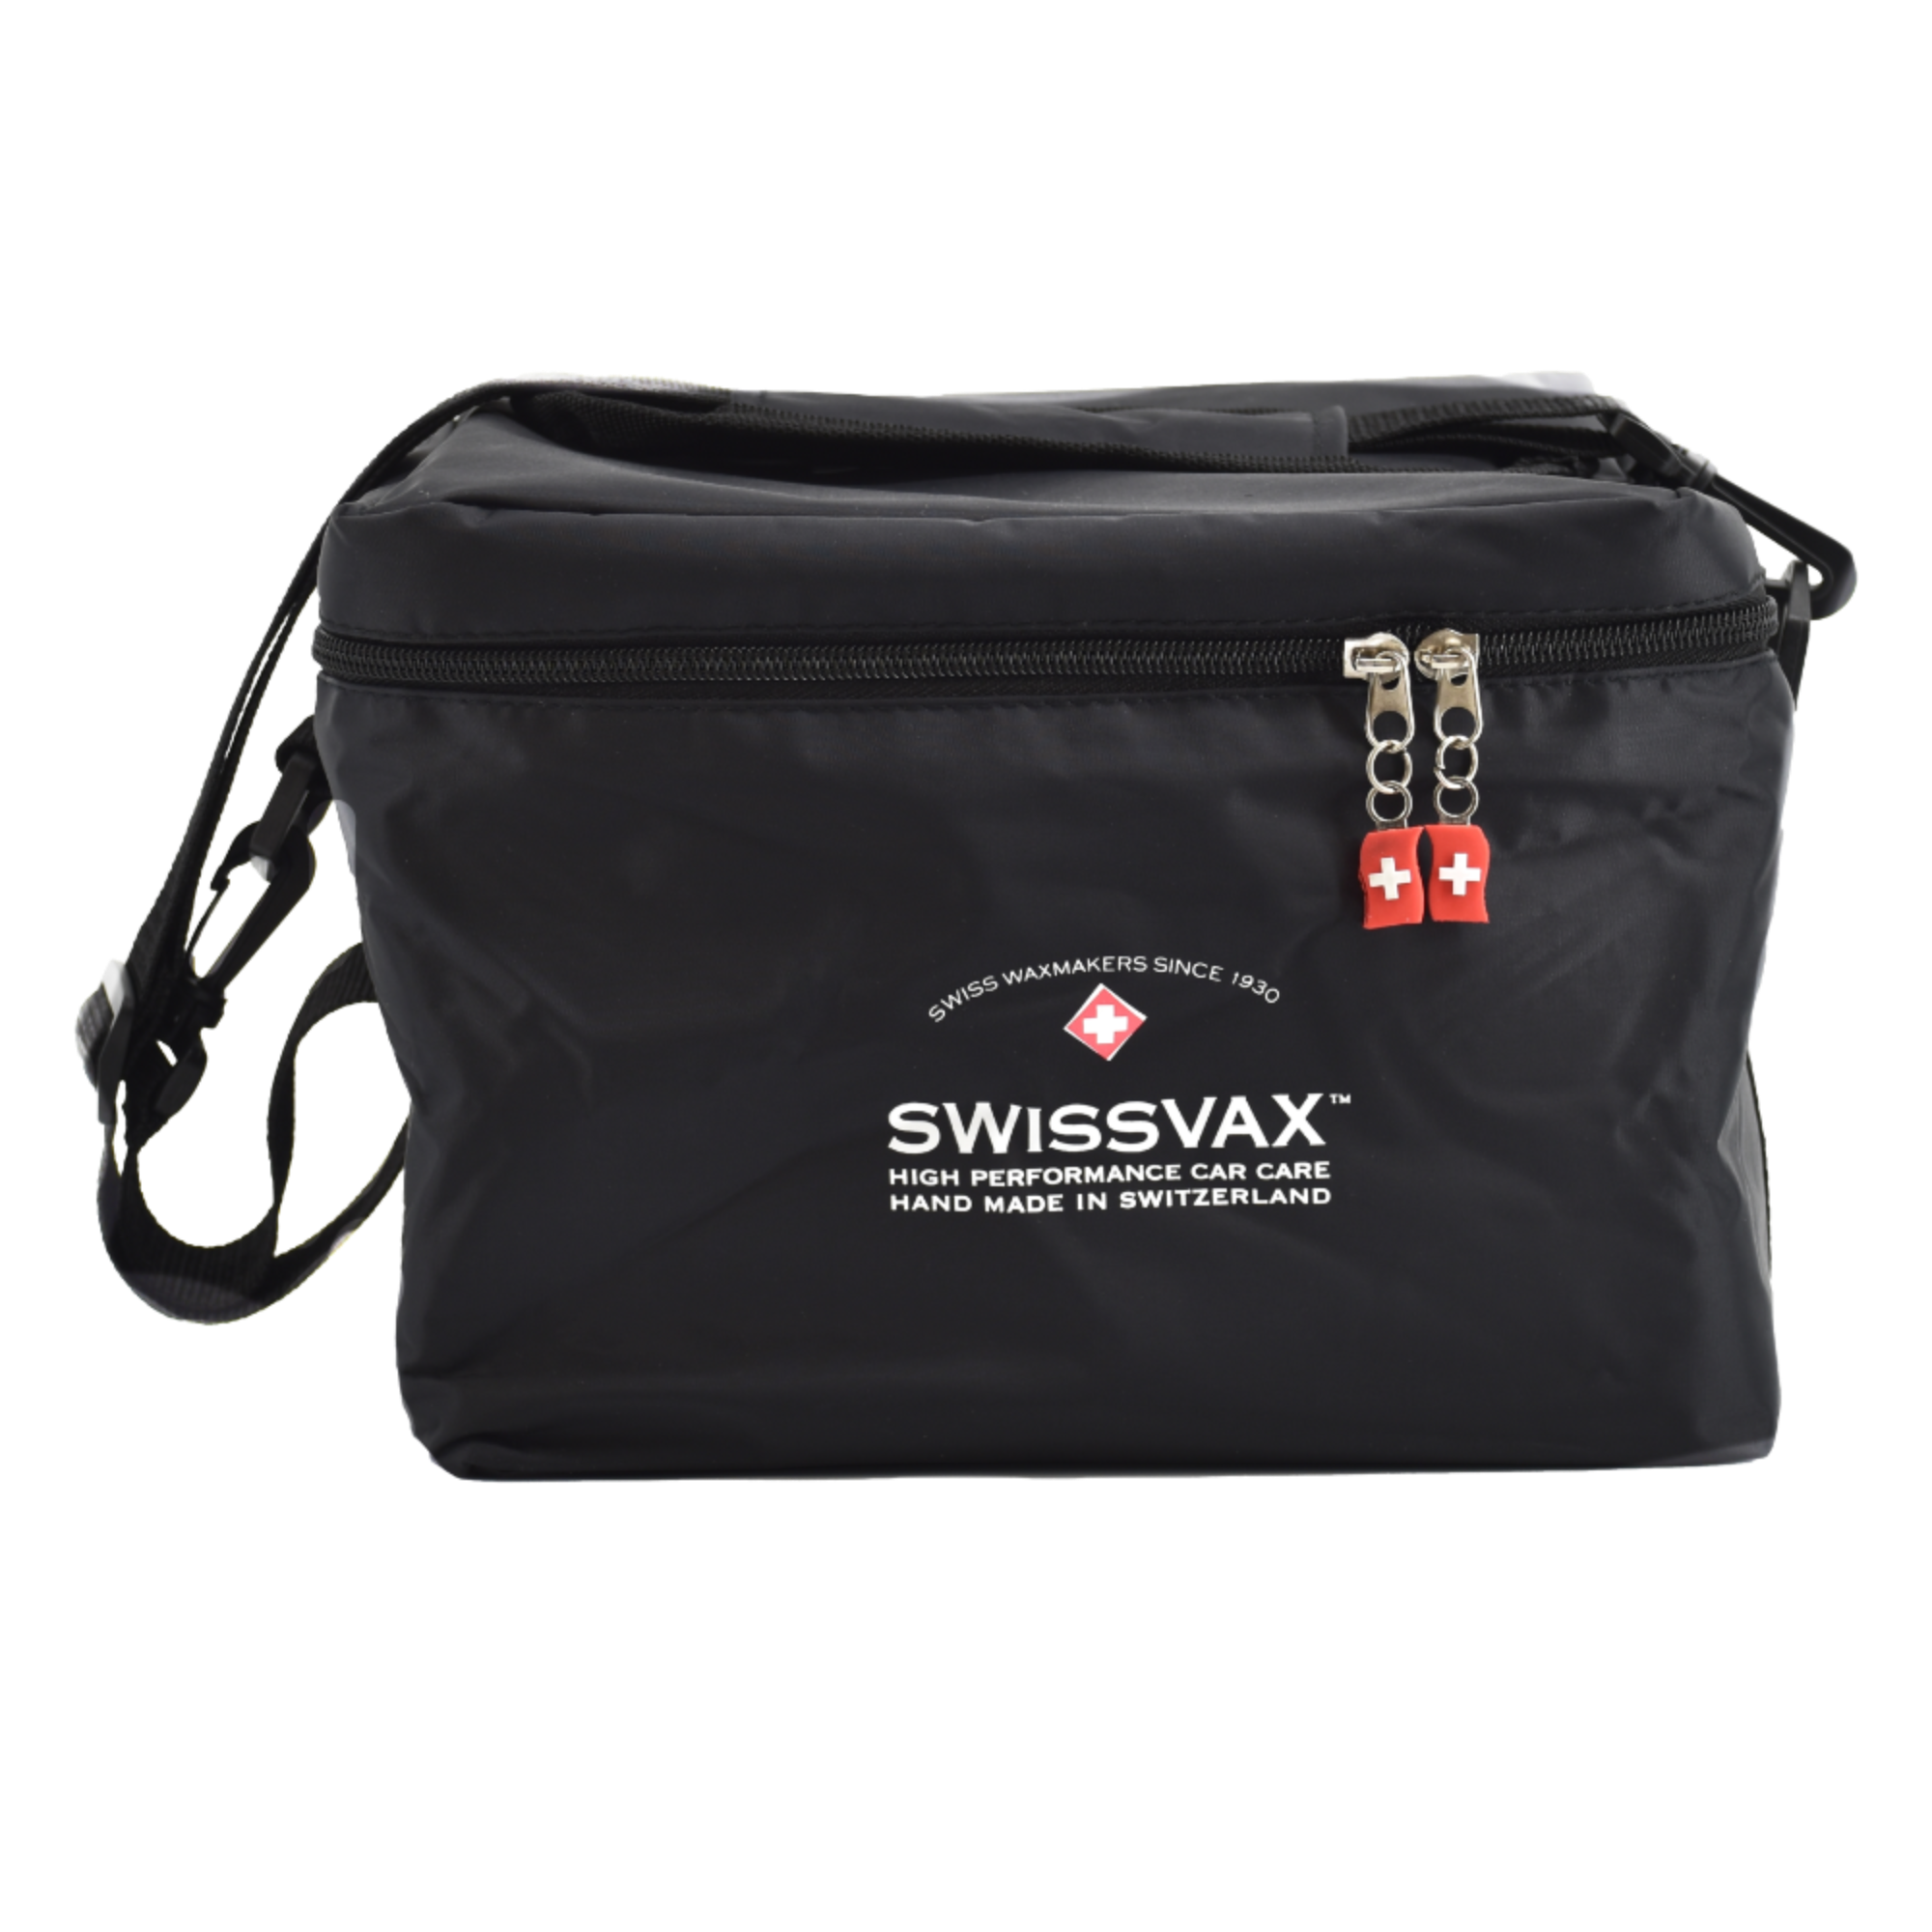 Swissvax COOLER BAG thermo-insulating storage bag